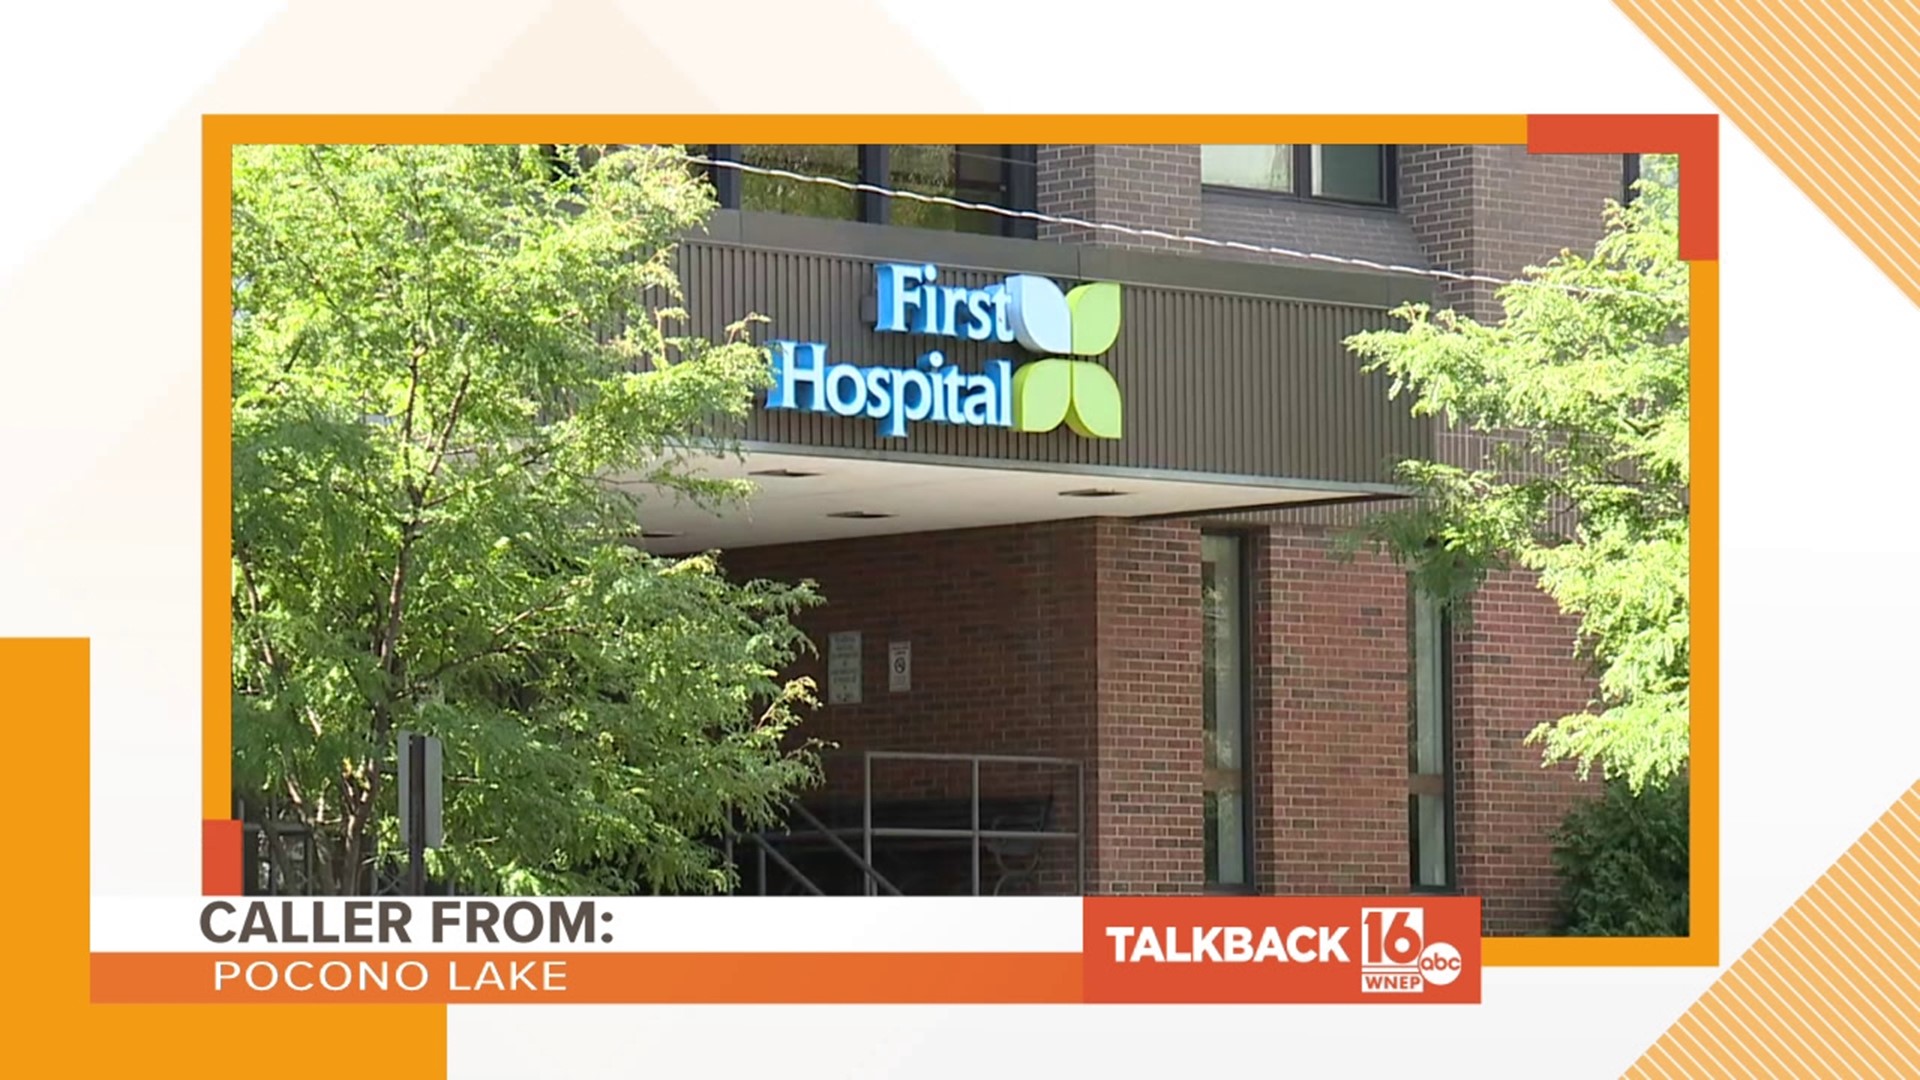 Callers are commenting on the recent First Hospital closure announcement in Kingston.